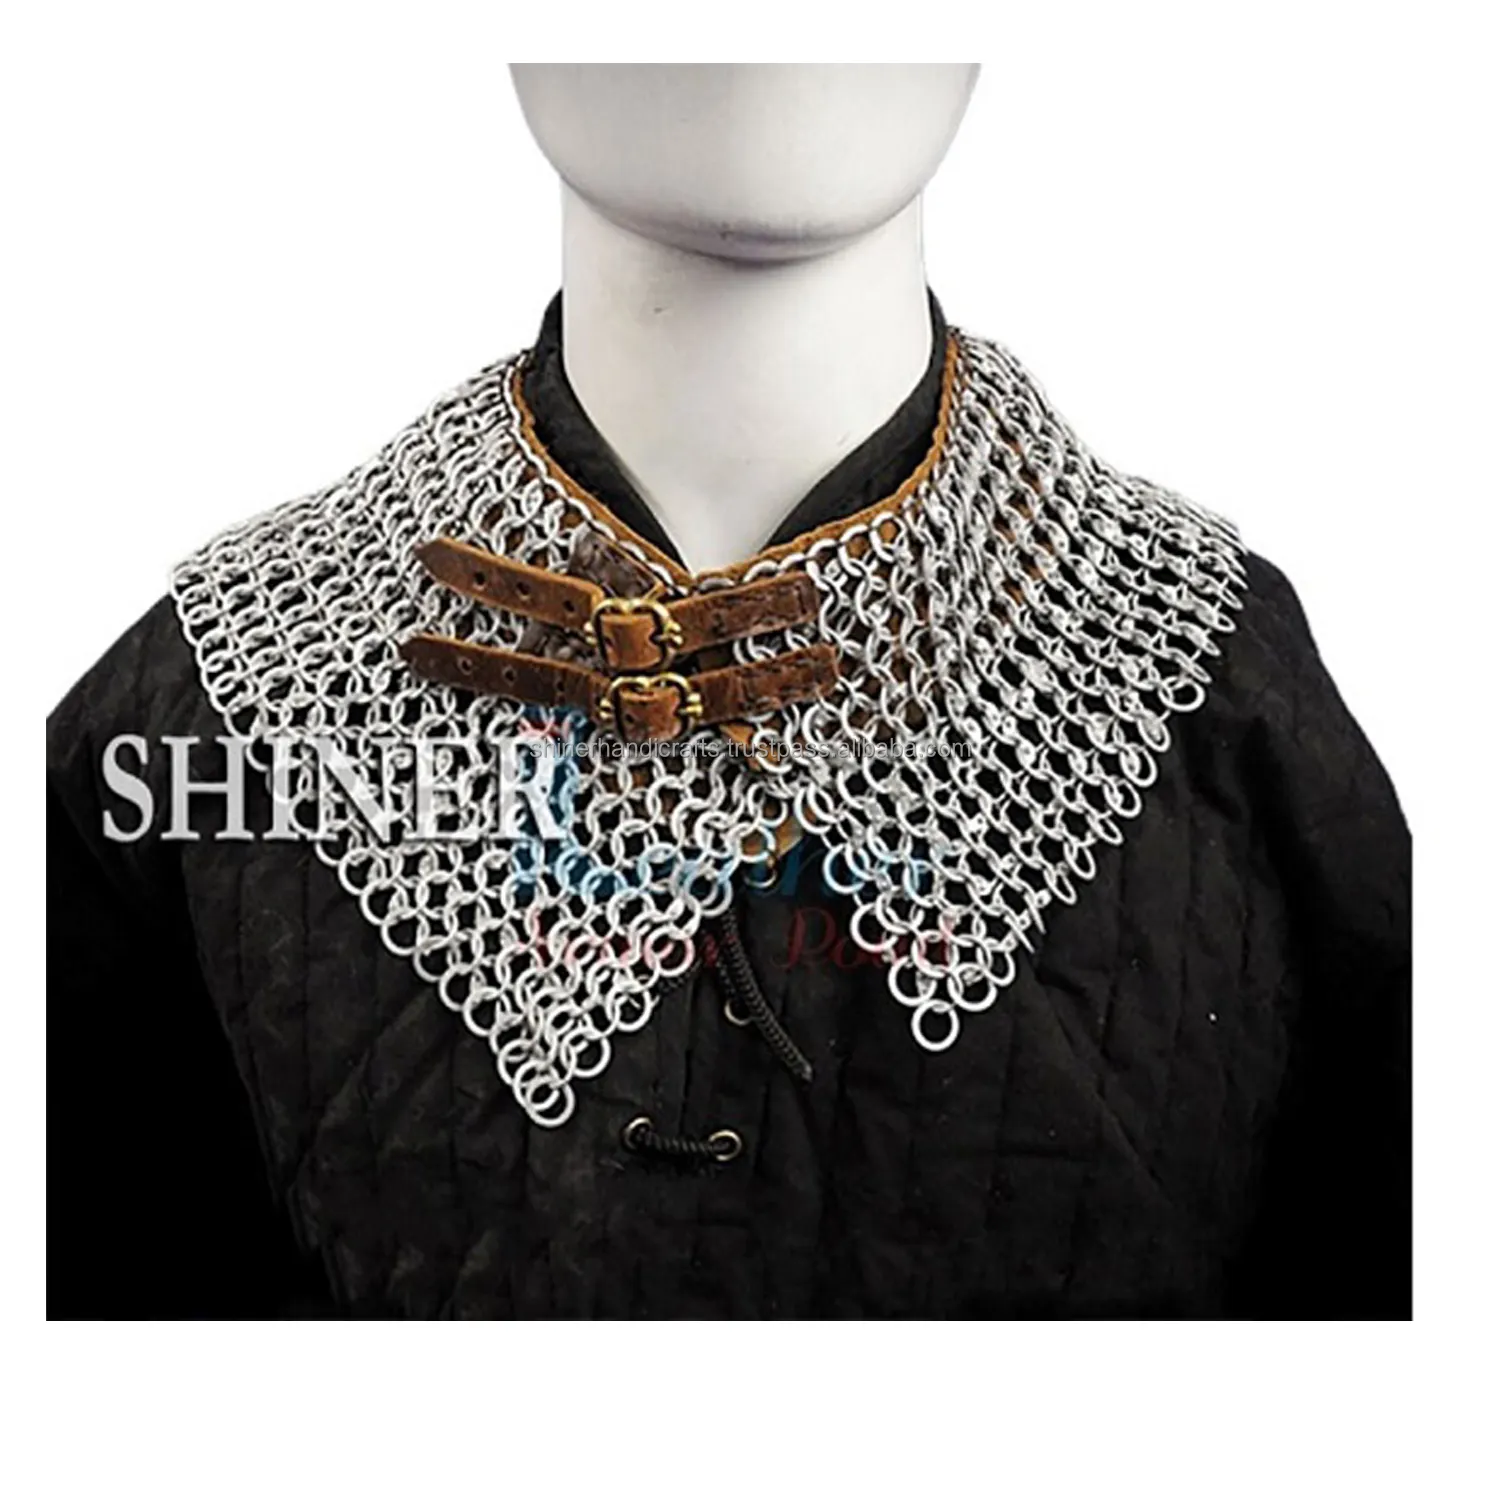 Medieval Chainmail Collar Armor SCA Reenactment Cosplay Wearable Nick Gorget Steel Collar GIft Item